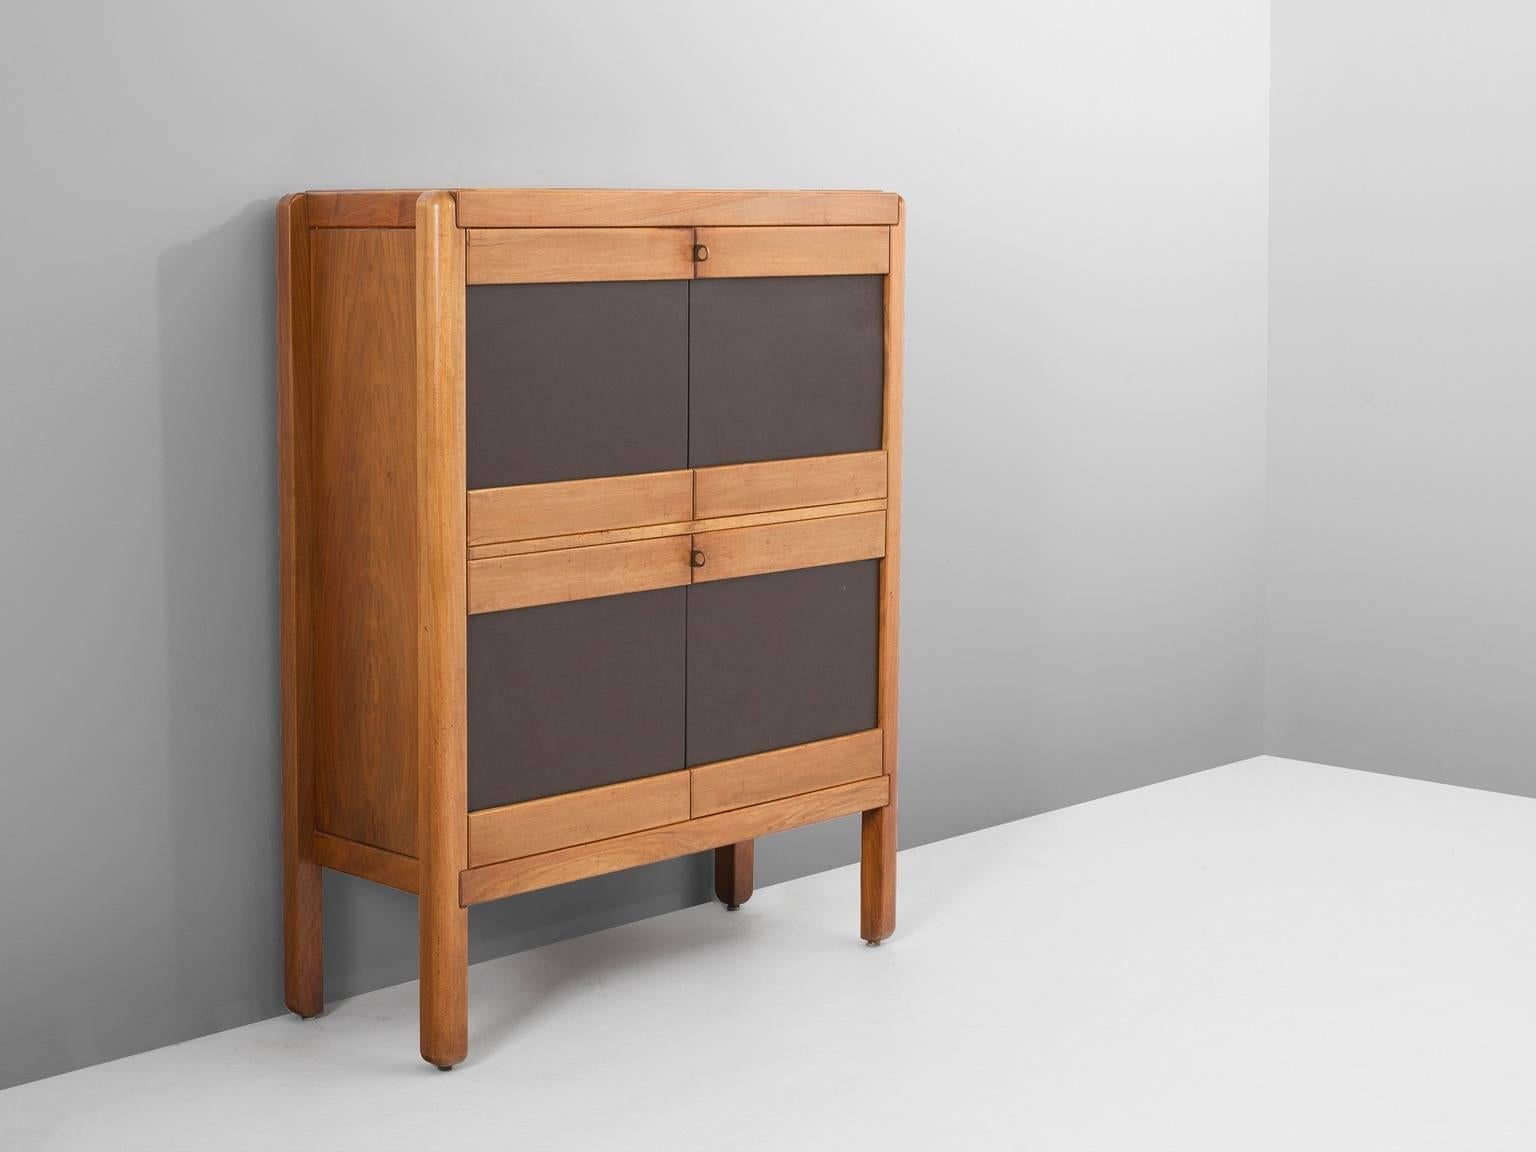 Cabinet in walnut, leather and brass, for Van den Berghe Pouvers PVBA, Belgium, 1960.

Highboard in walnut veneer with dark brown leather doors. Beautiful rounded edges and brass details. The leather front makes a nice contrast to the natural